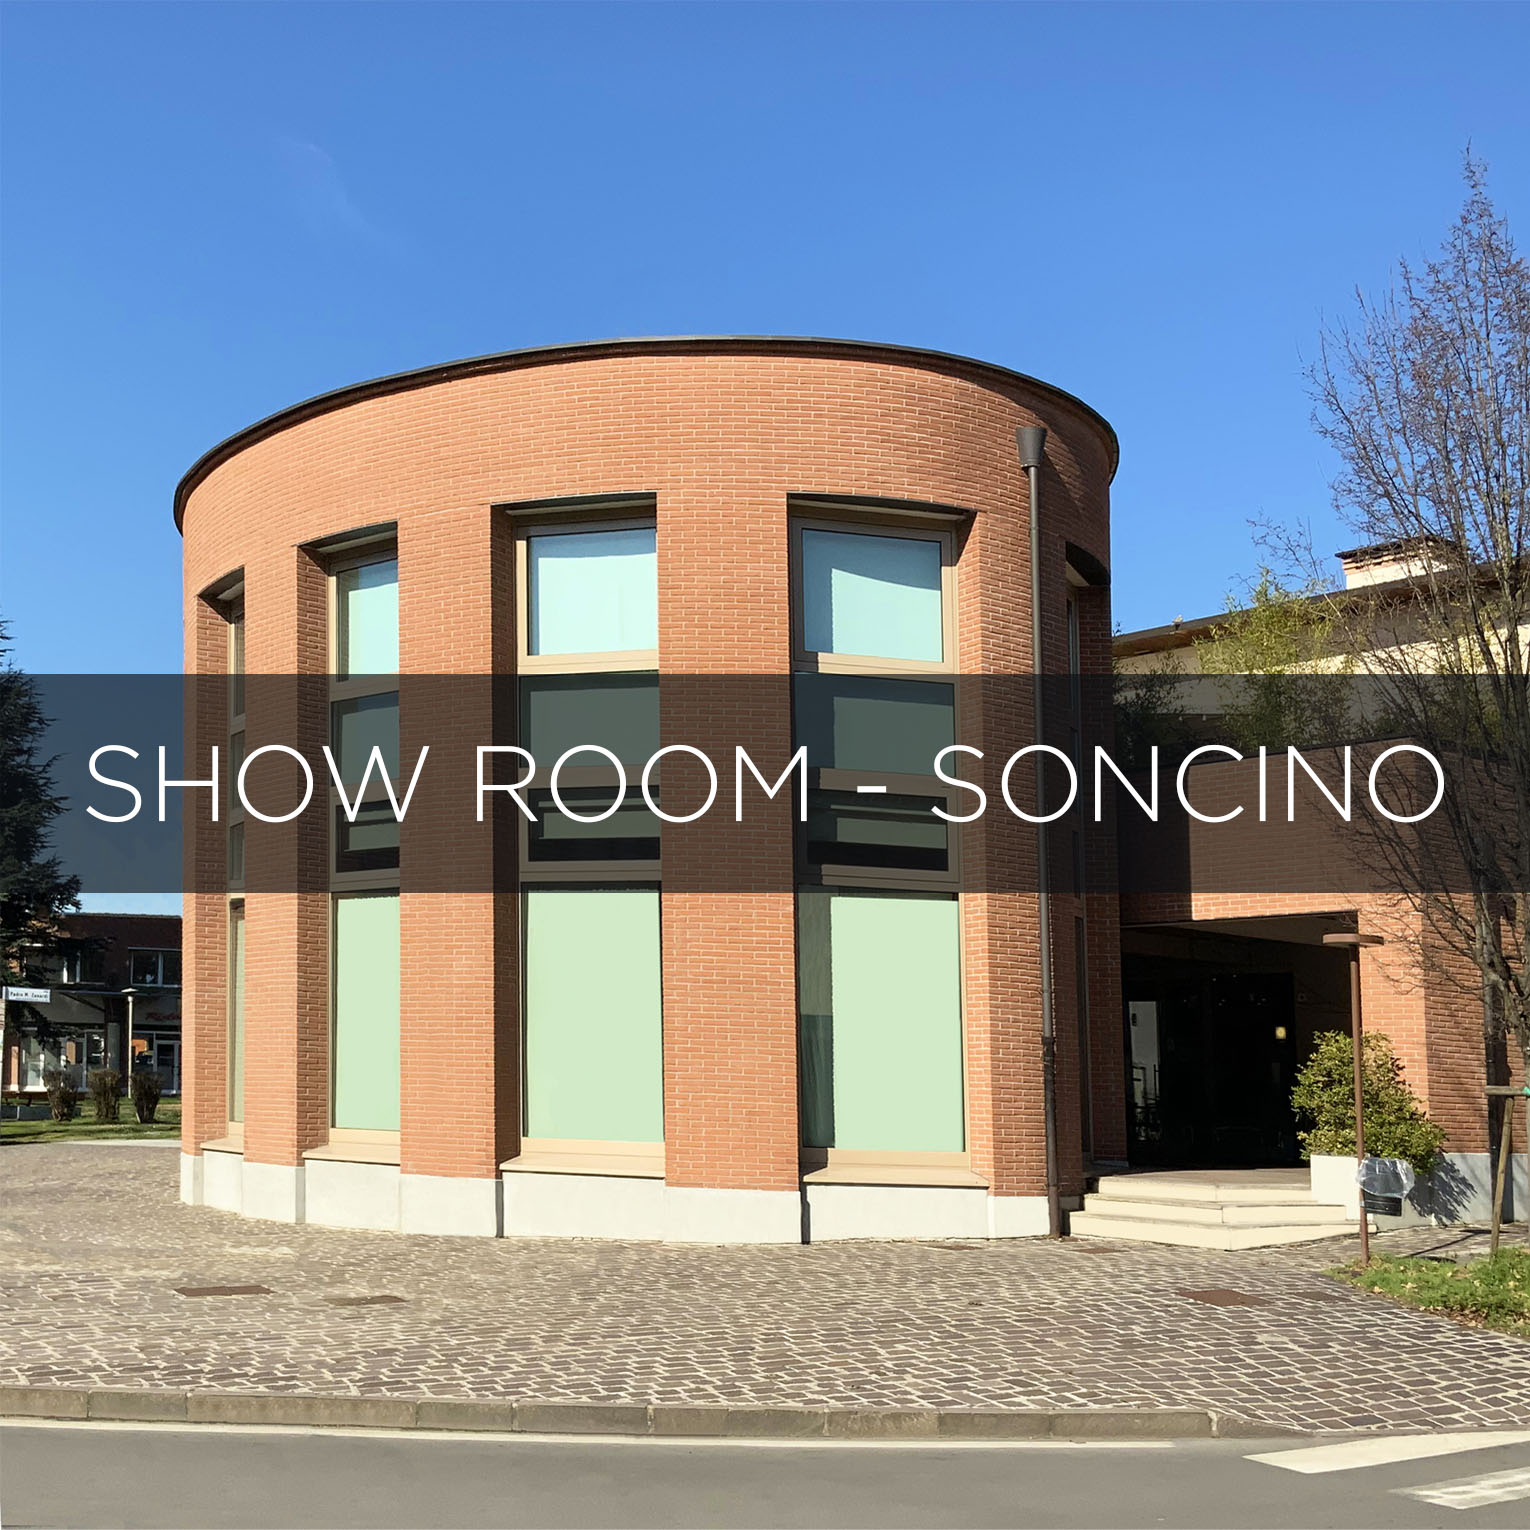 Showroom Soncino (CR) - Qbx Design